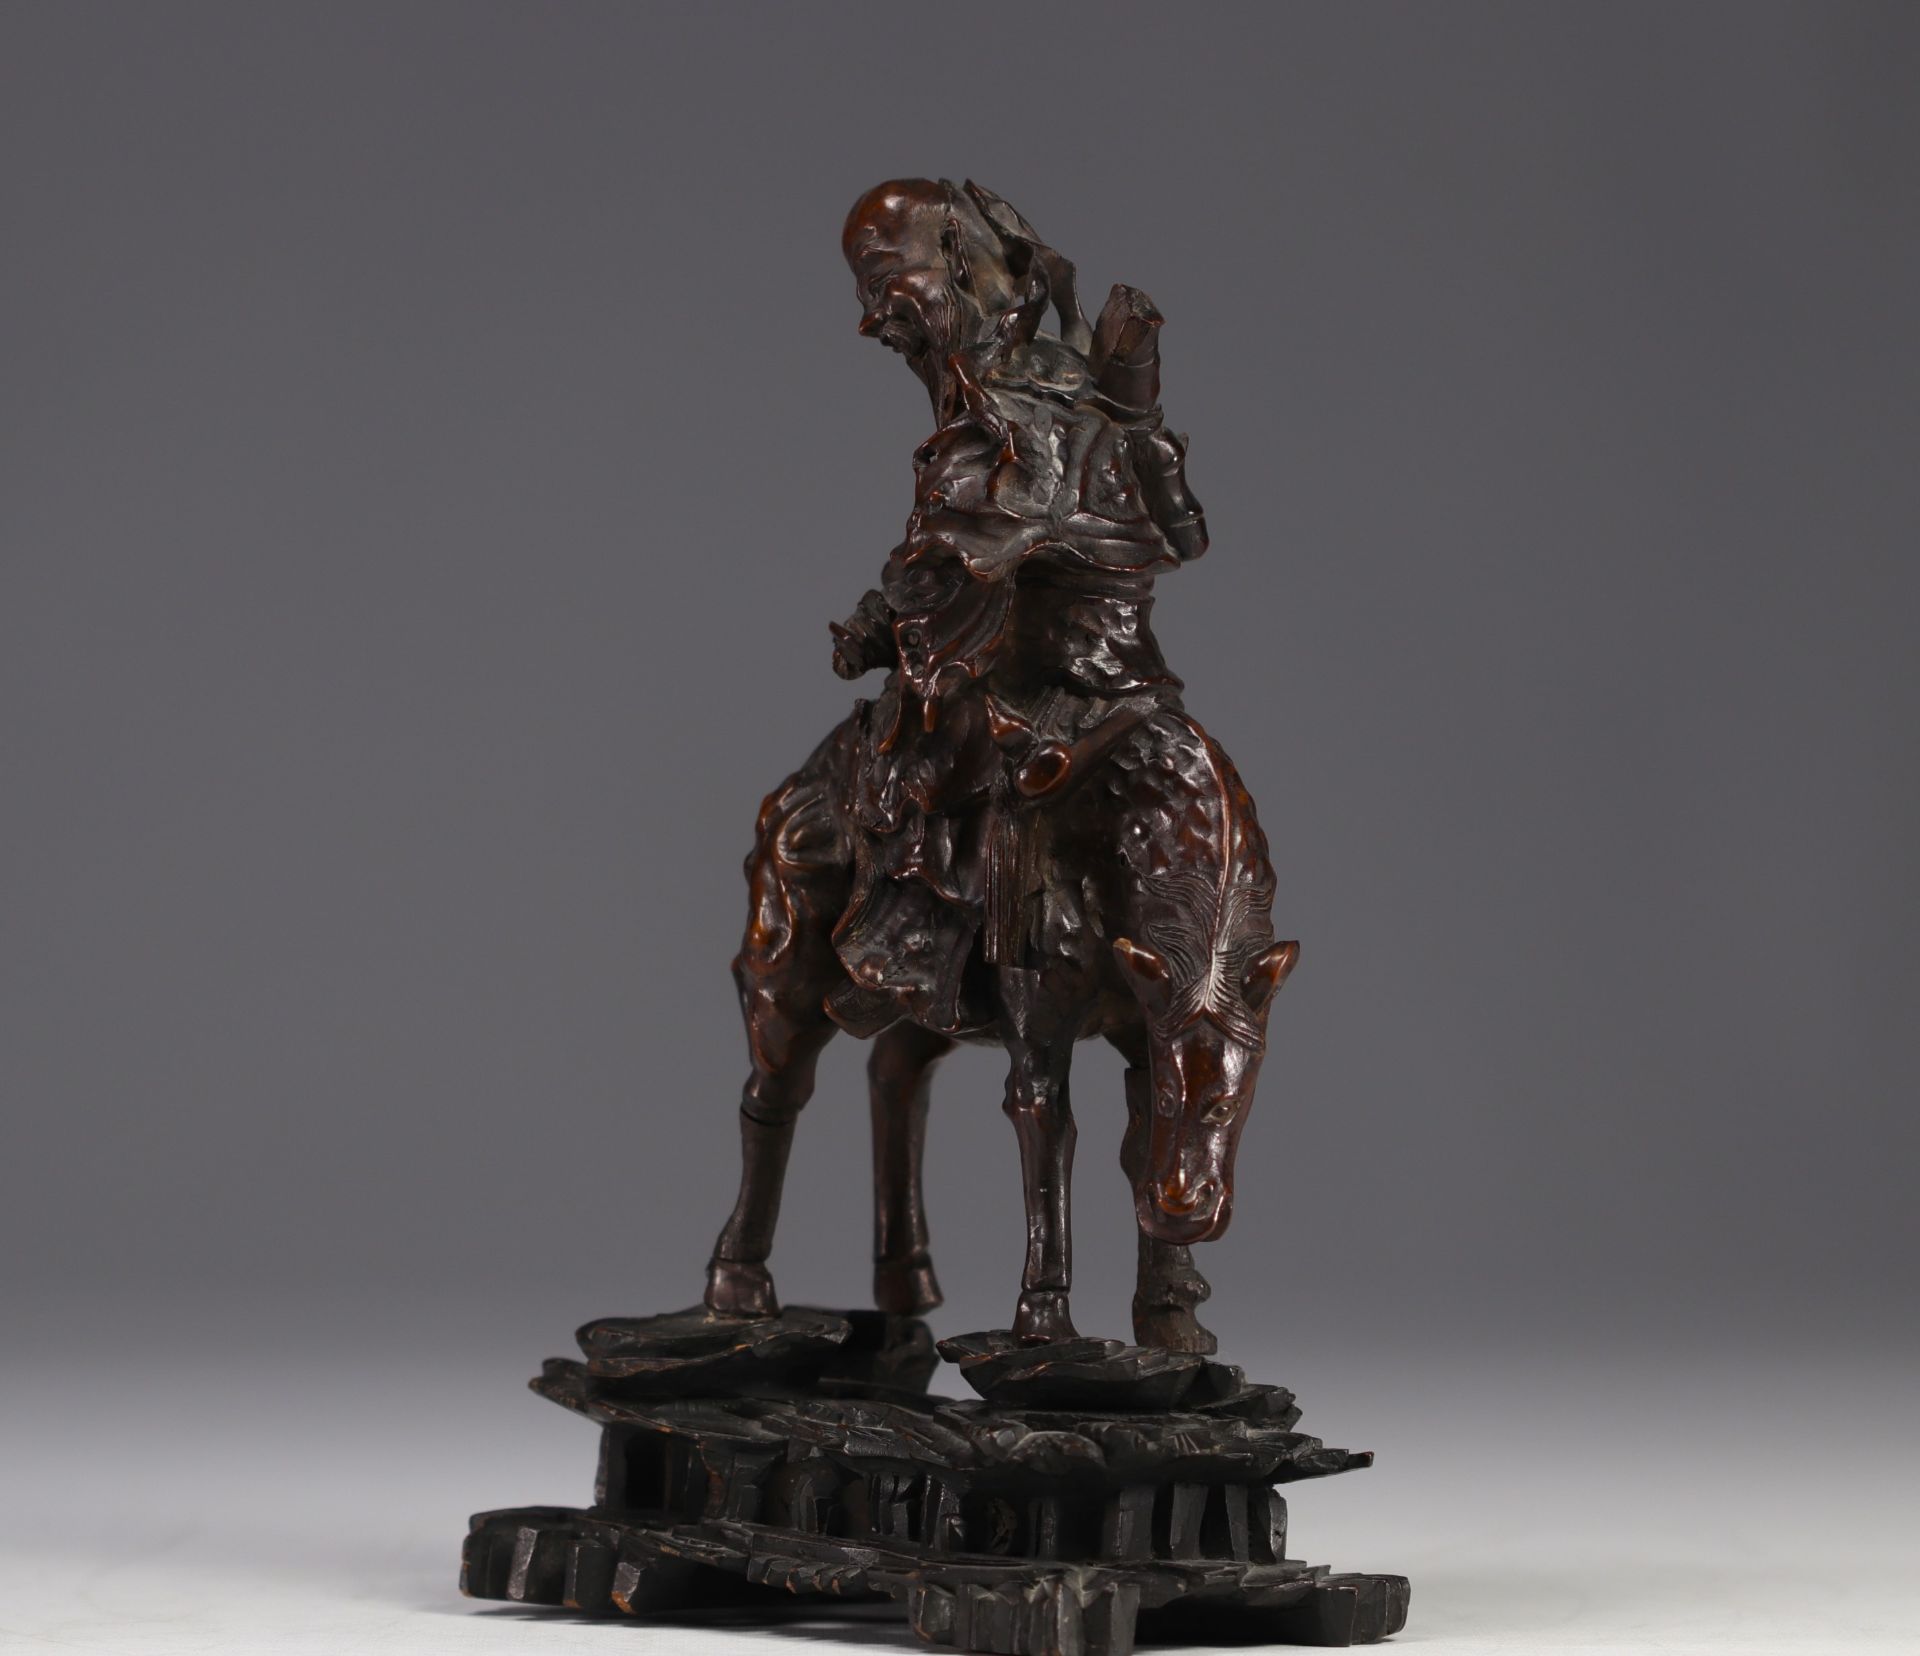 Wooden "root" sculpture of a figure on horseback from China, late 18th century - Image 3 of 4